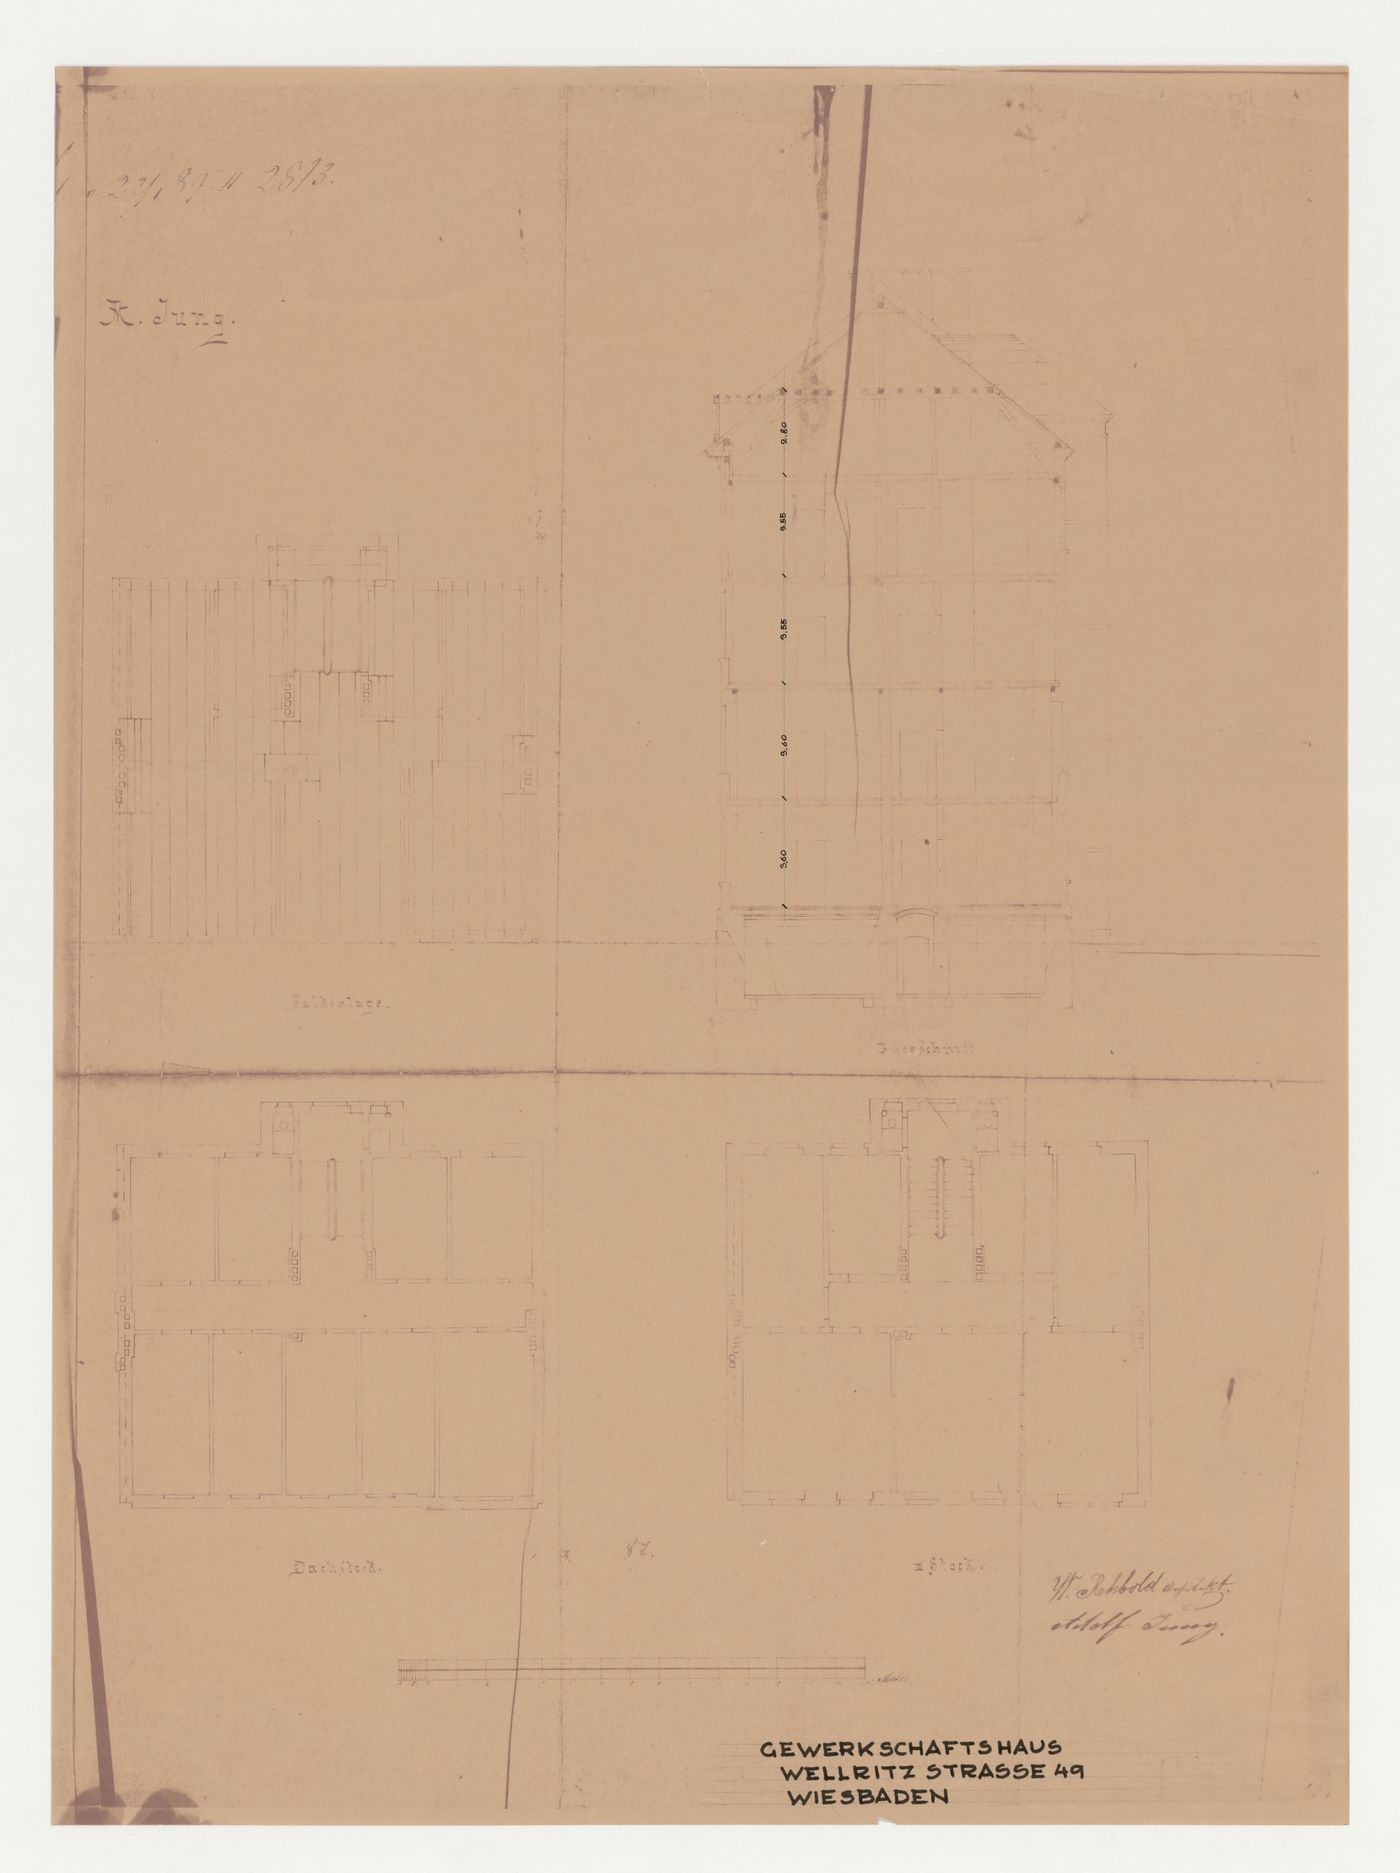 Plans and section, possibly for alterations and additions for a trade union corporate headquarters, Wiesbaden, Germany